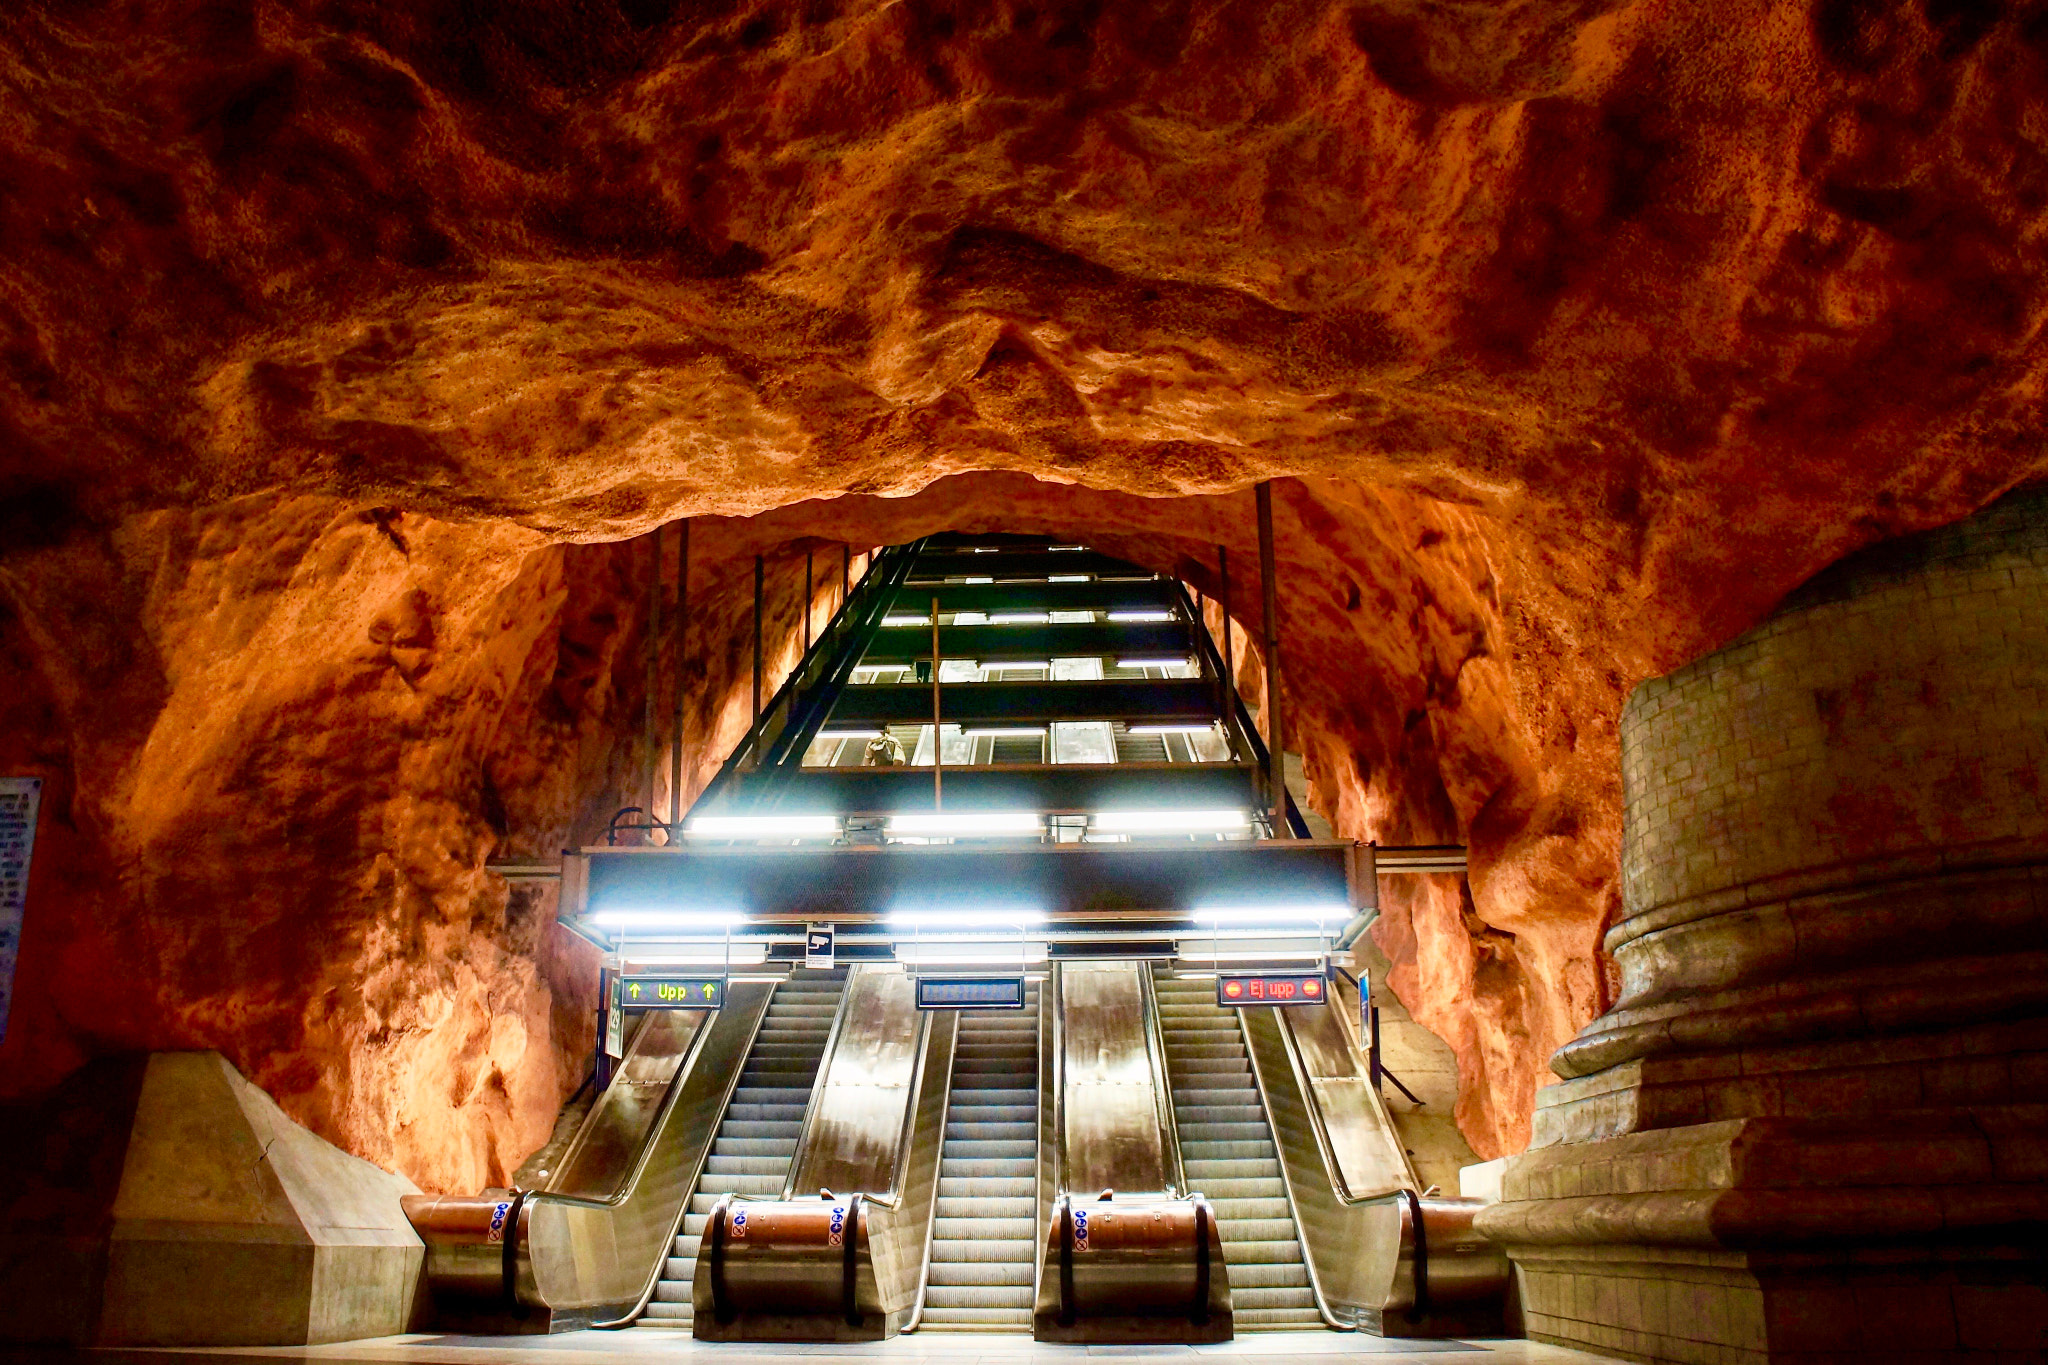 Sony Alpha NEX-F3 sample photo. When stockholm shows its beauty under the ground! photography